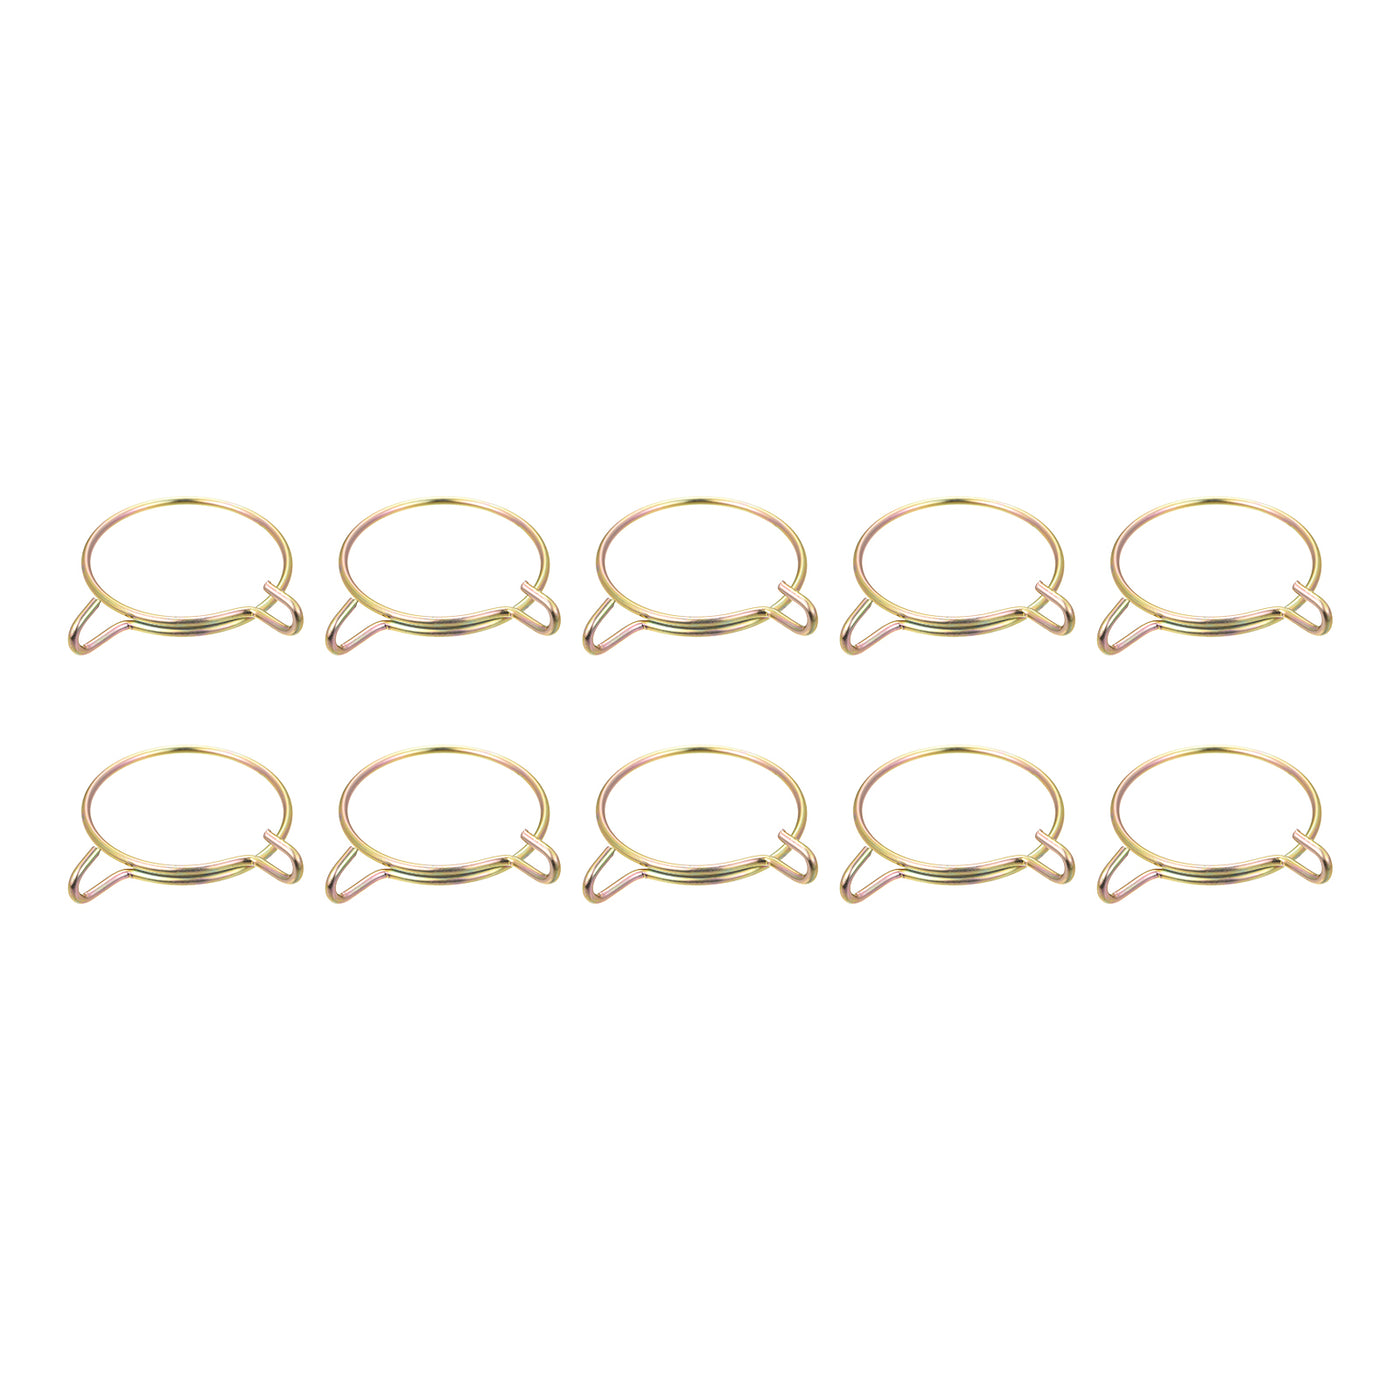 Uxcell Uxcell Fuel Line Hose Clips, 10pcs 60mm 65Mn Steel Tubing Spring Clamps